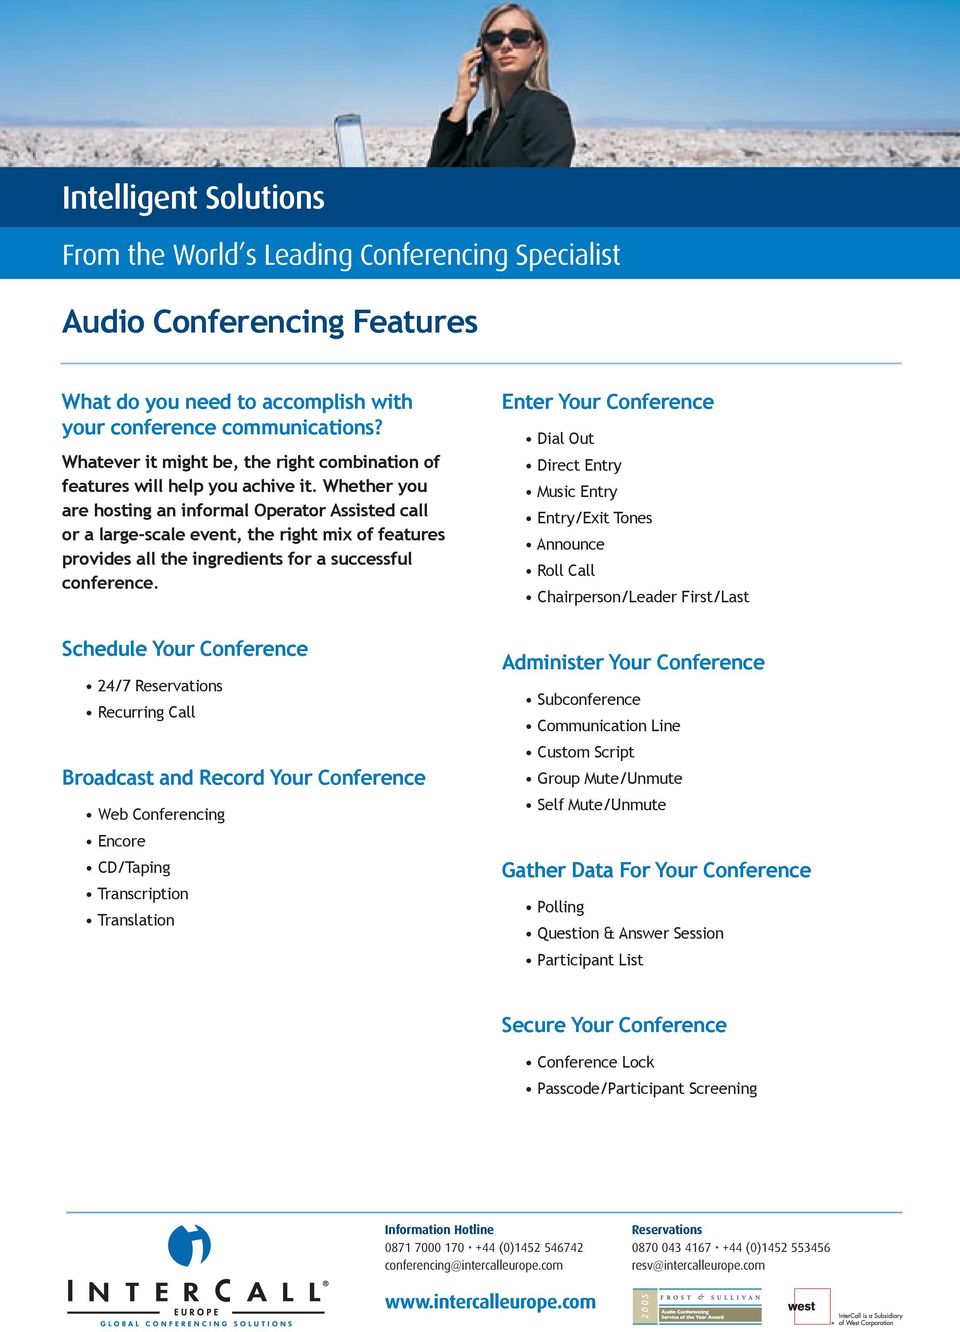 Schedule Your Conference 24/7 Recurring Call Broadcast and Record Your Conference Web Conferencing Encore CD/Taping Transcription Translation Enter Your Conference Dial Out Direct Entry Music Entry